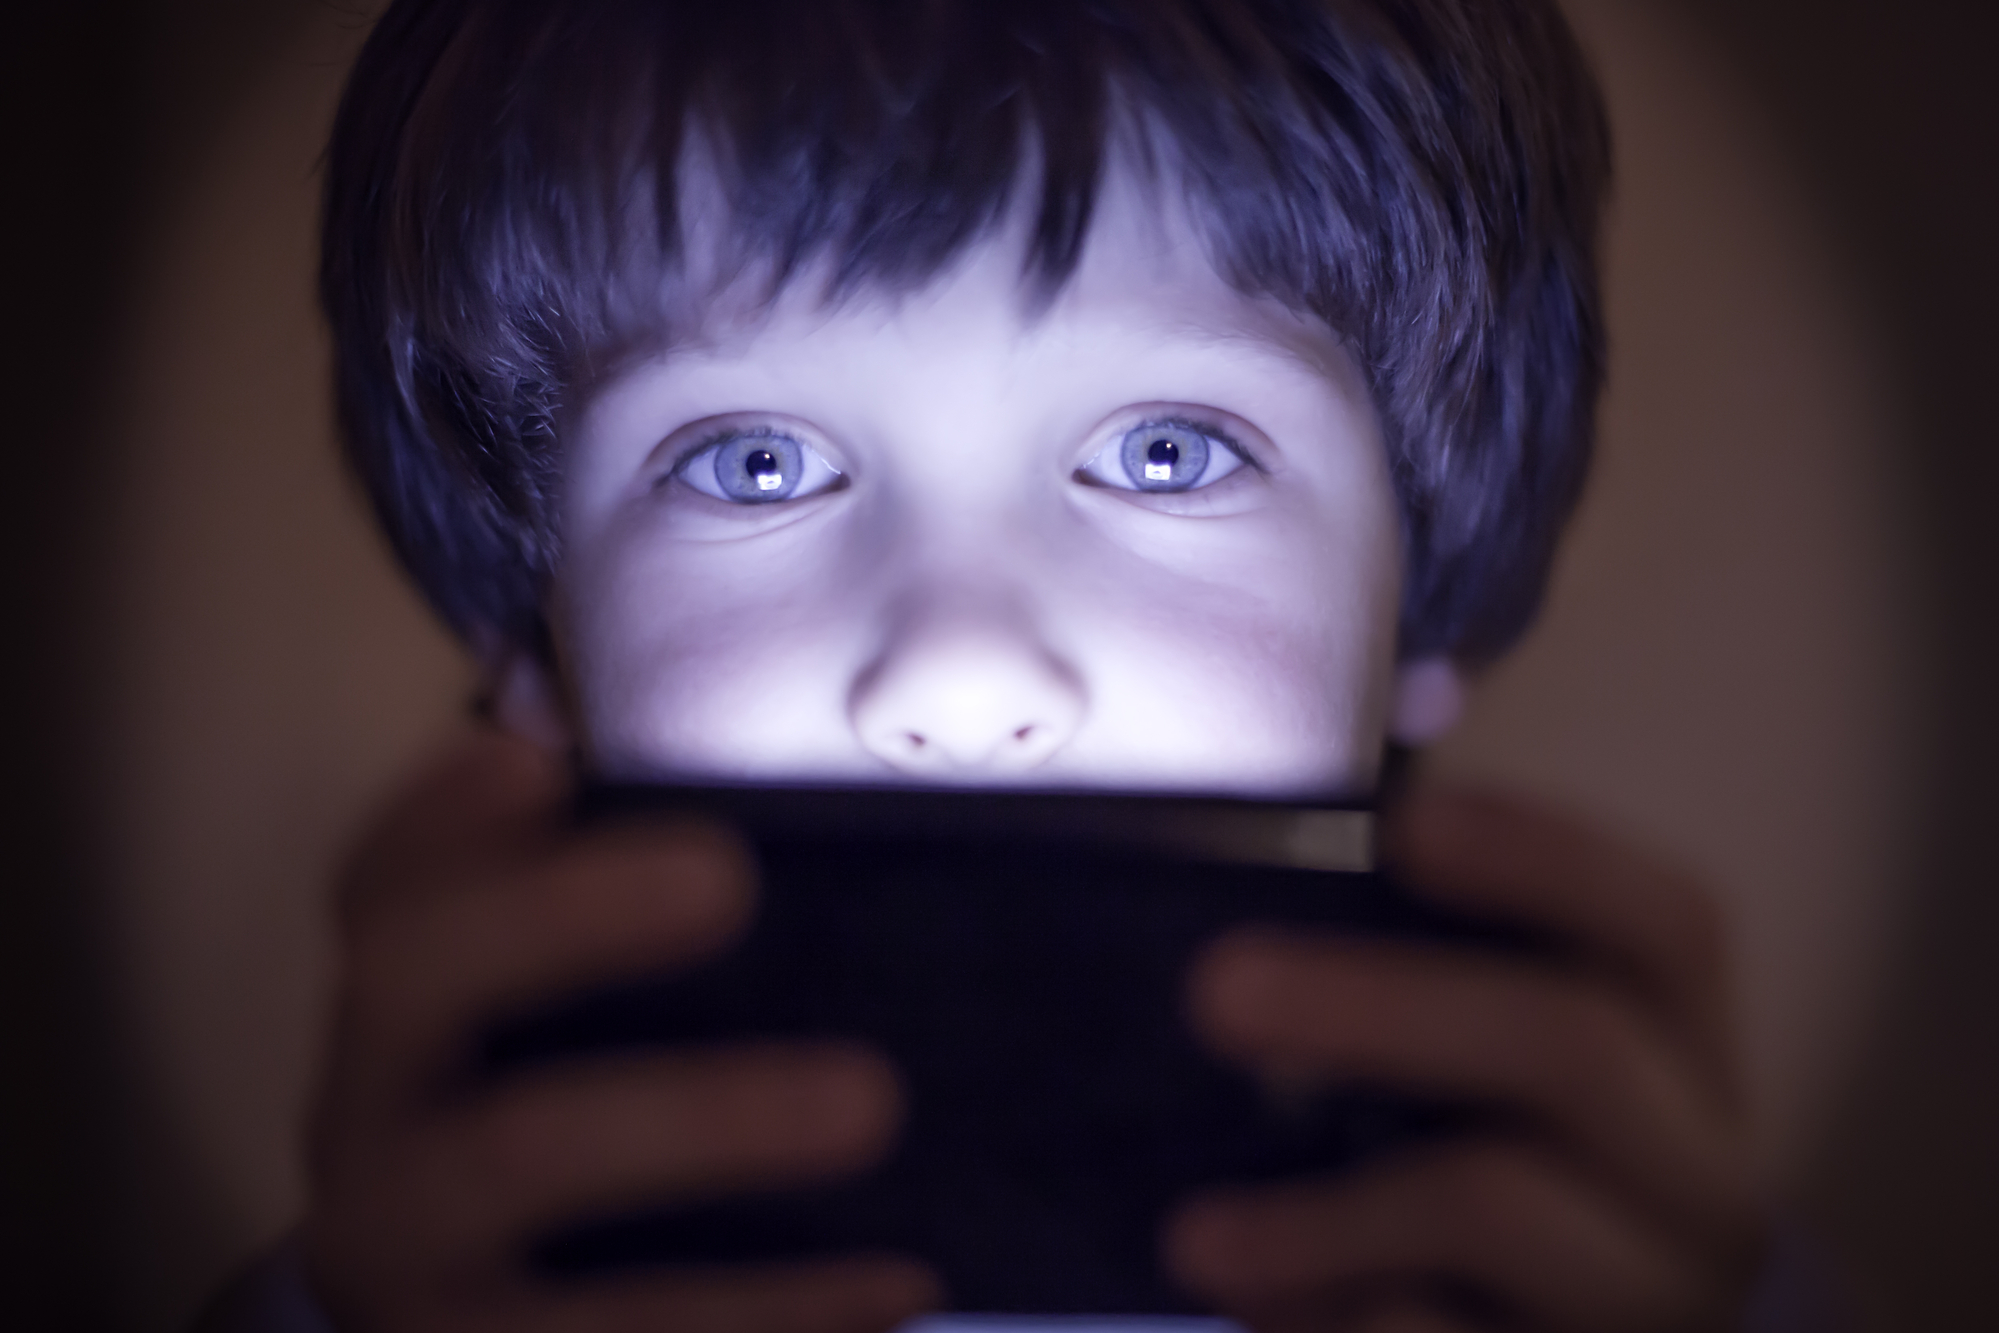 photograph of small child playing on smartphone